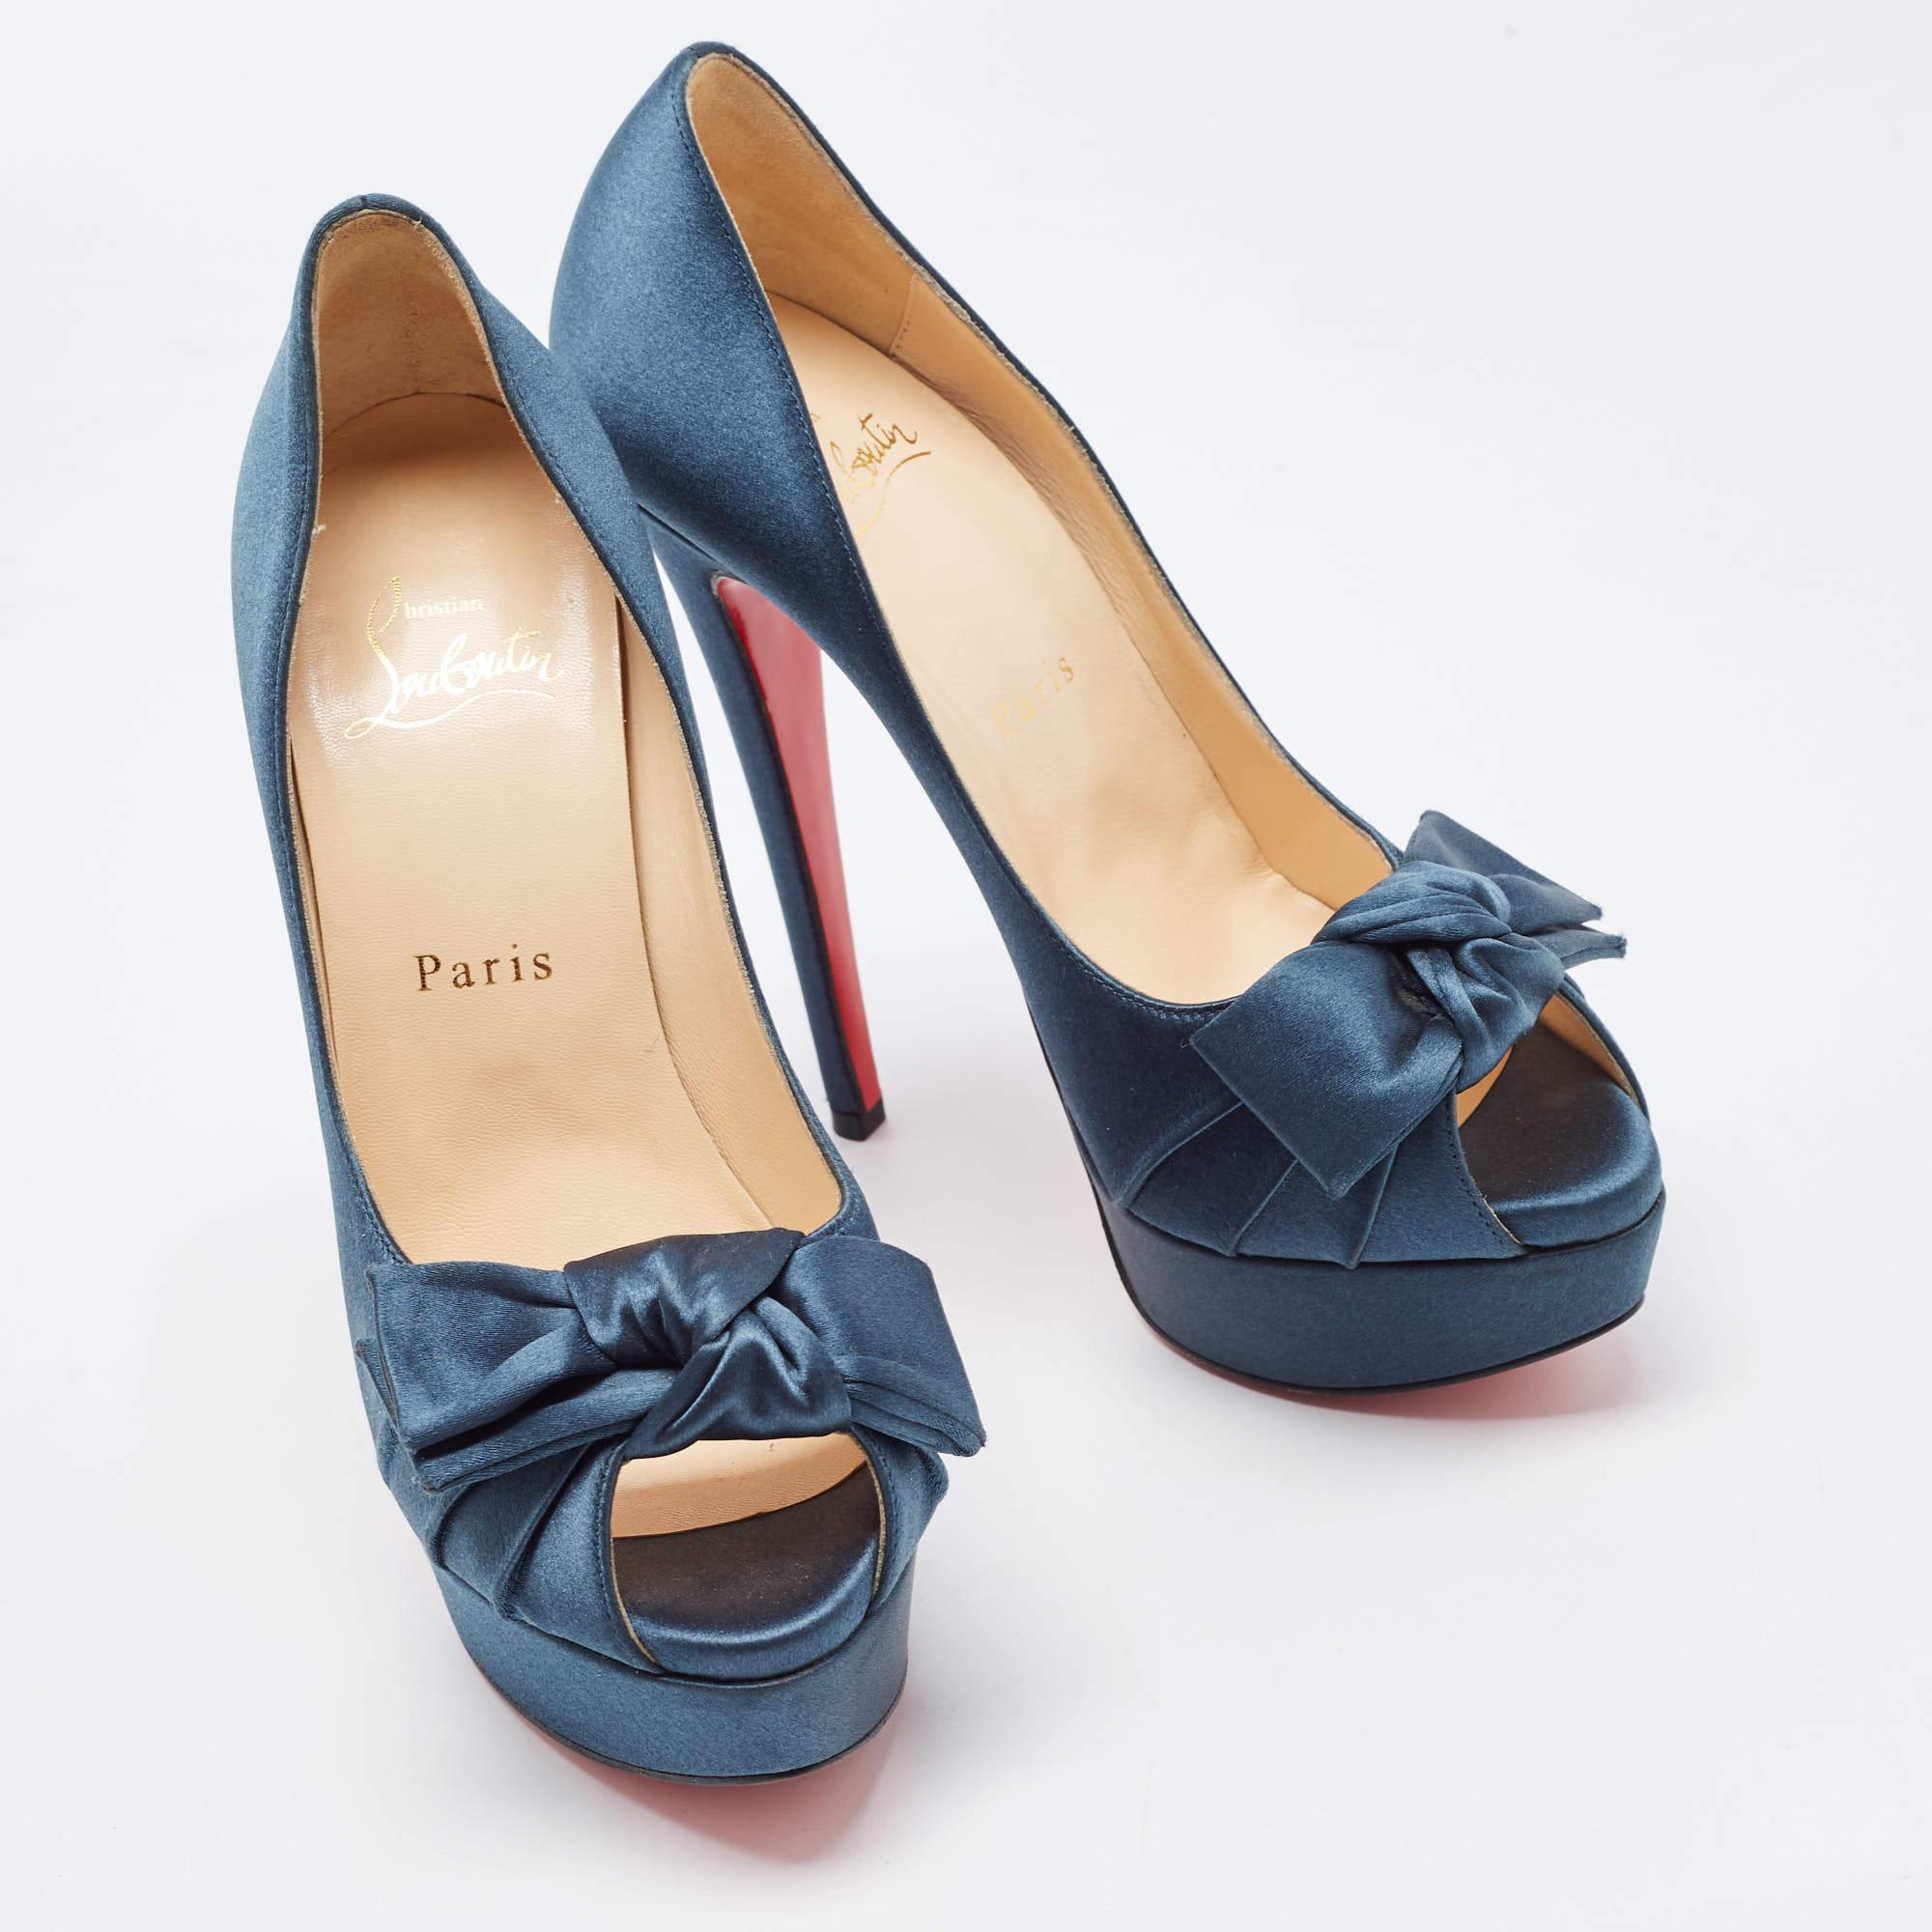 Christian Louboutin Teal Satin Madame Butterfly Pumps Size 37 For Sale 3